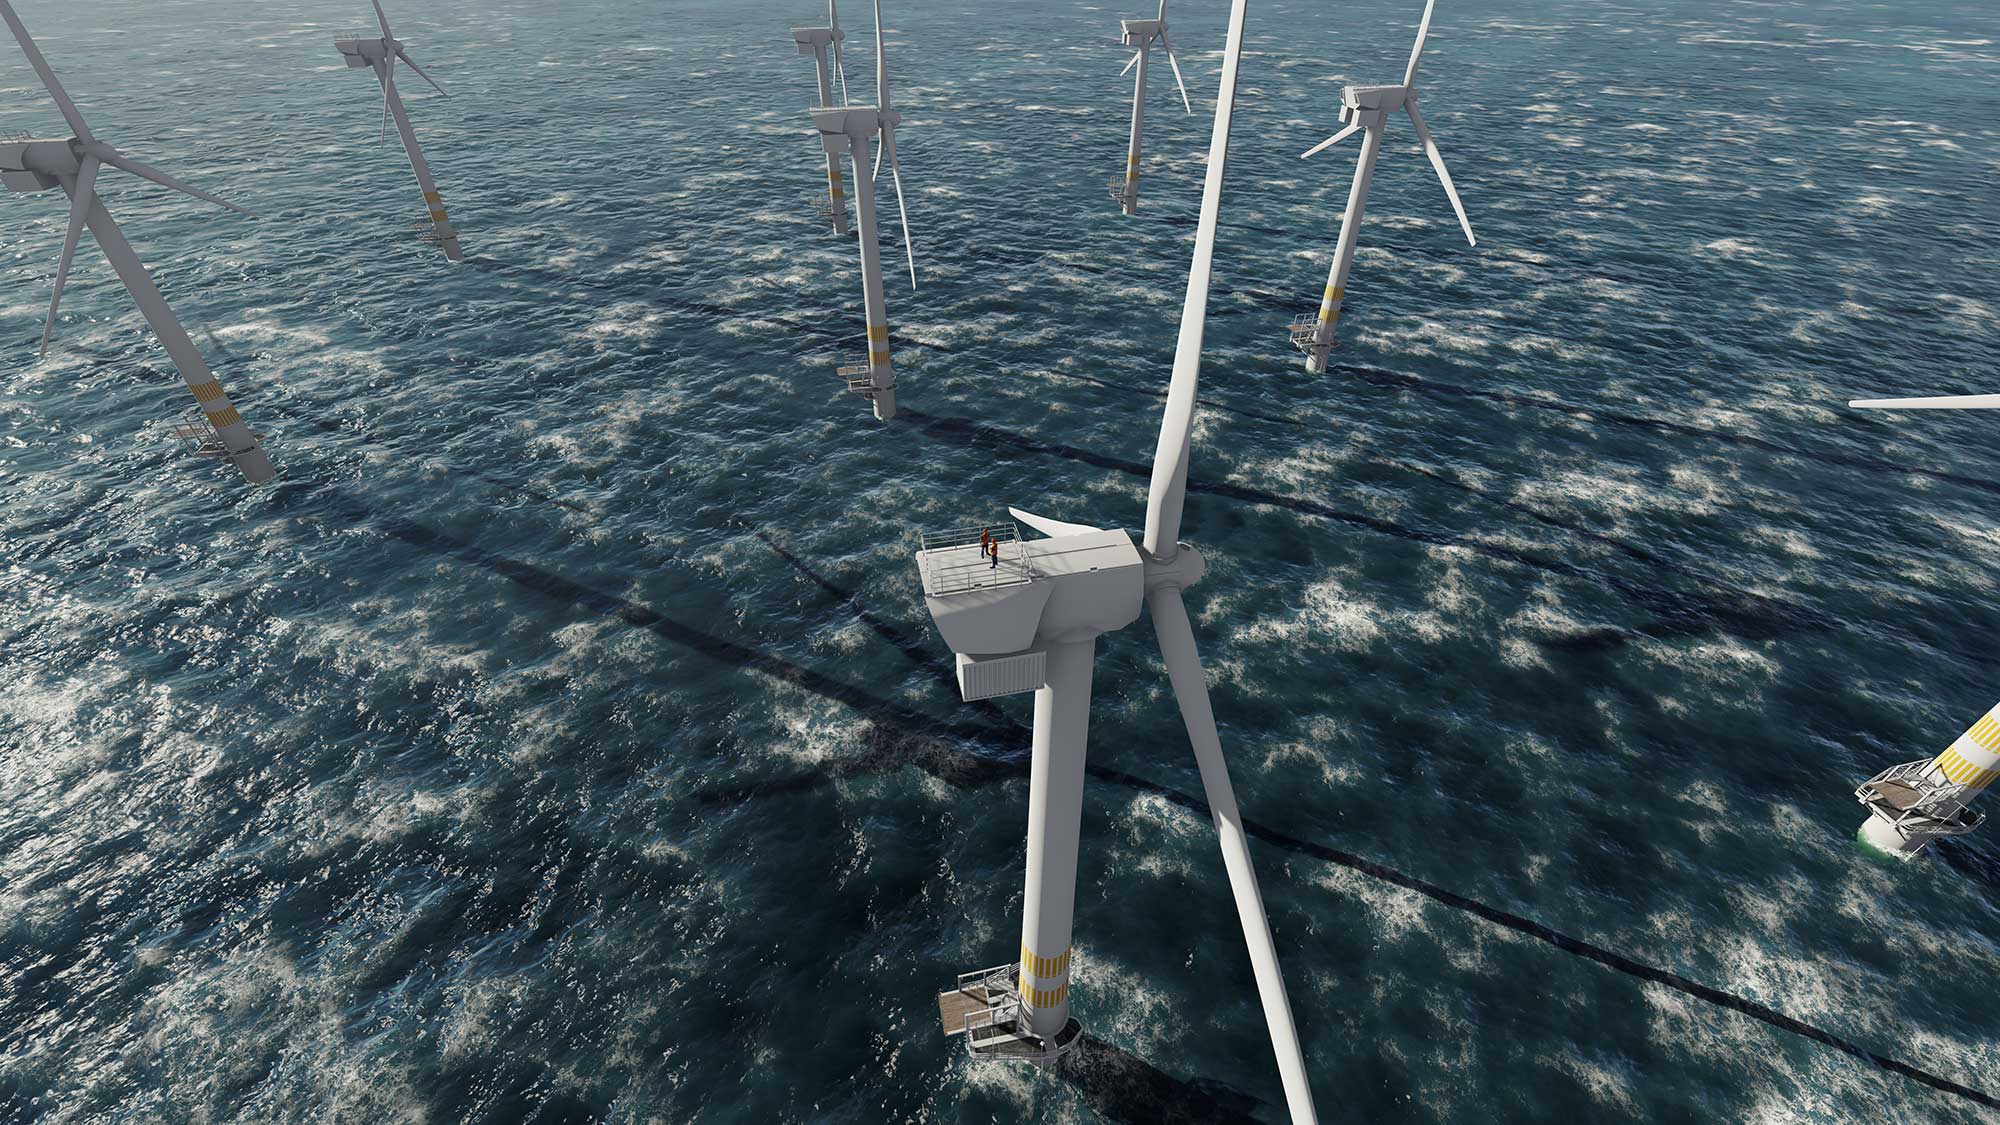 Offshore wind farm engineers